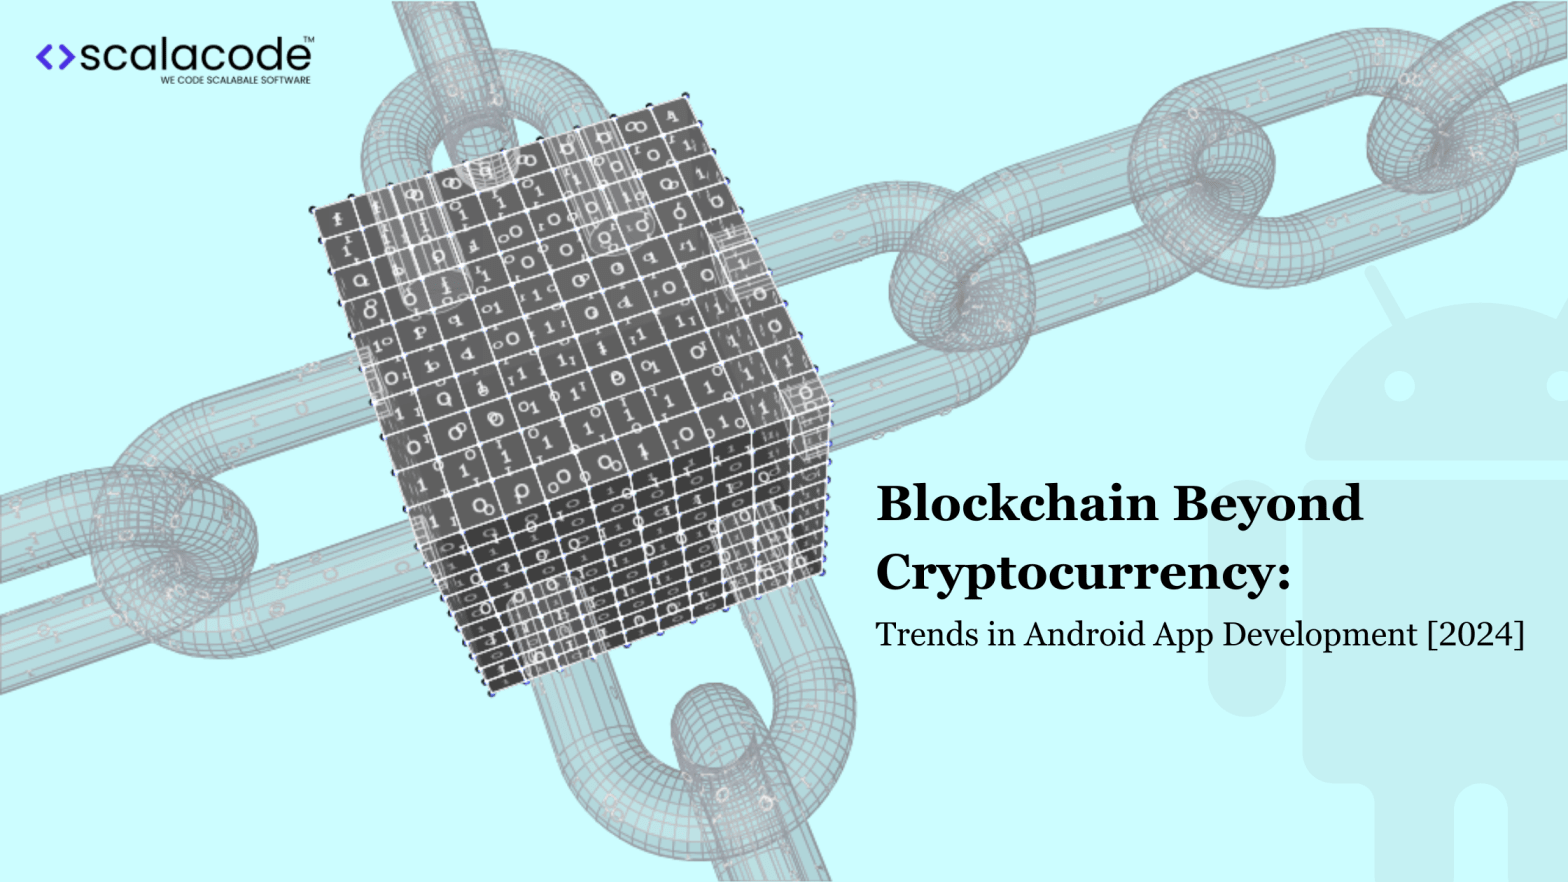 blockchain beyond cryptocurrency - trends in android app development [2024]